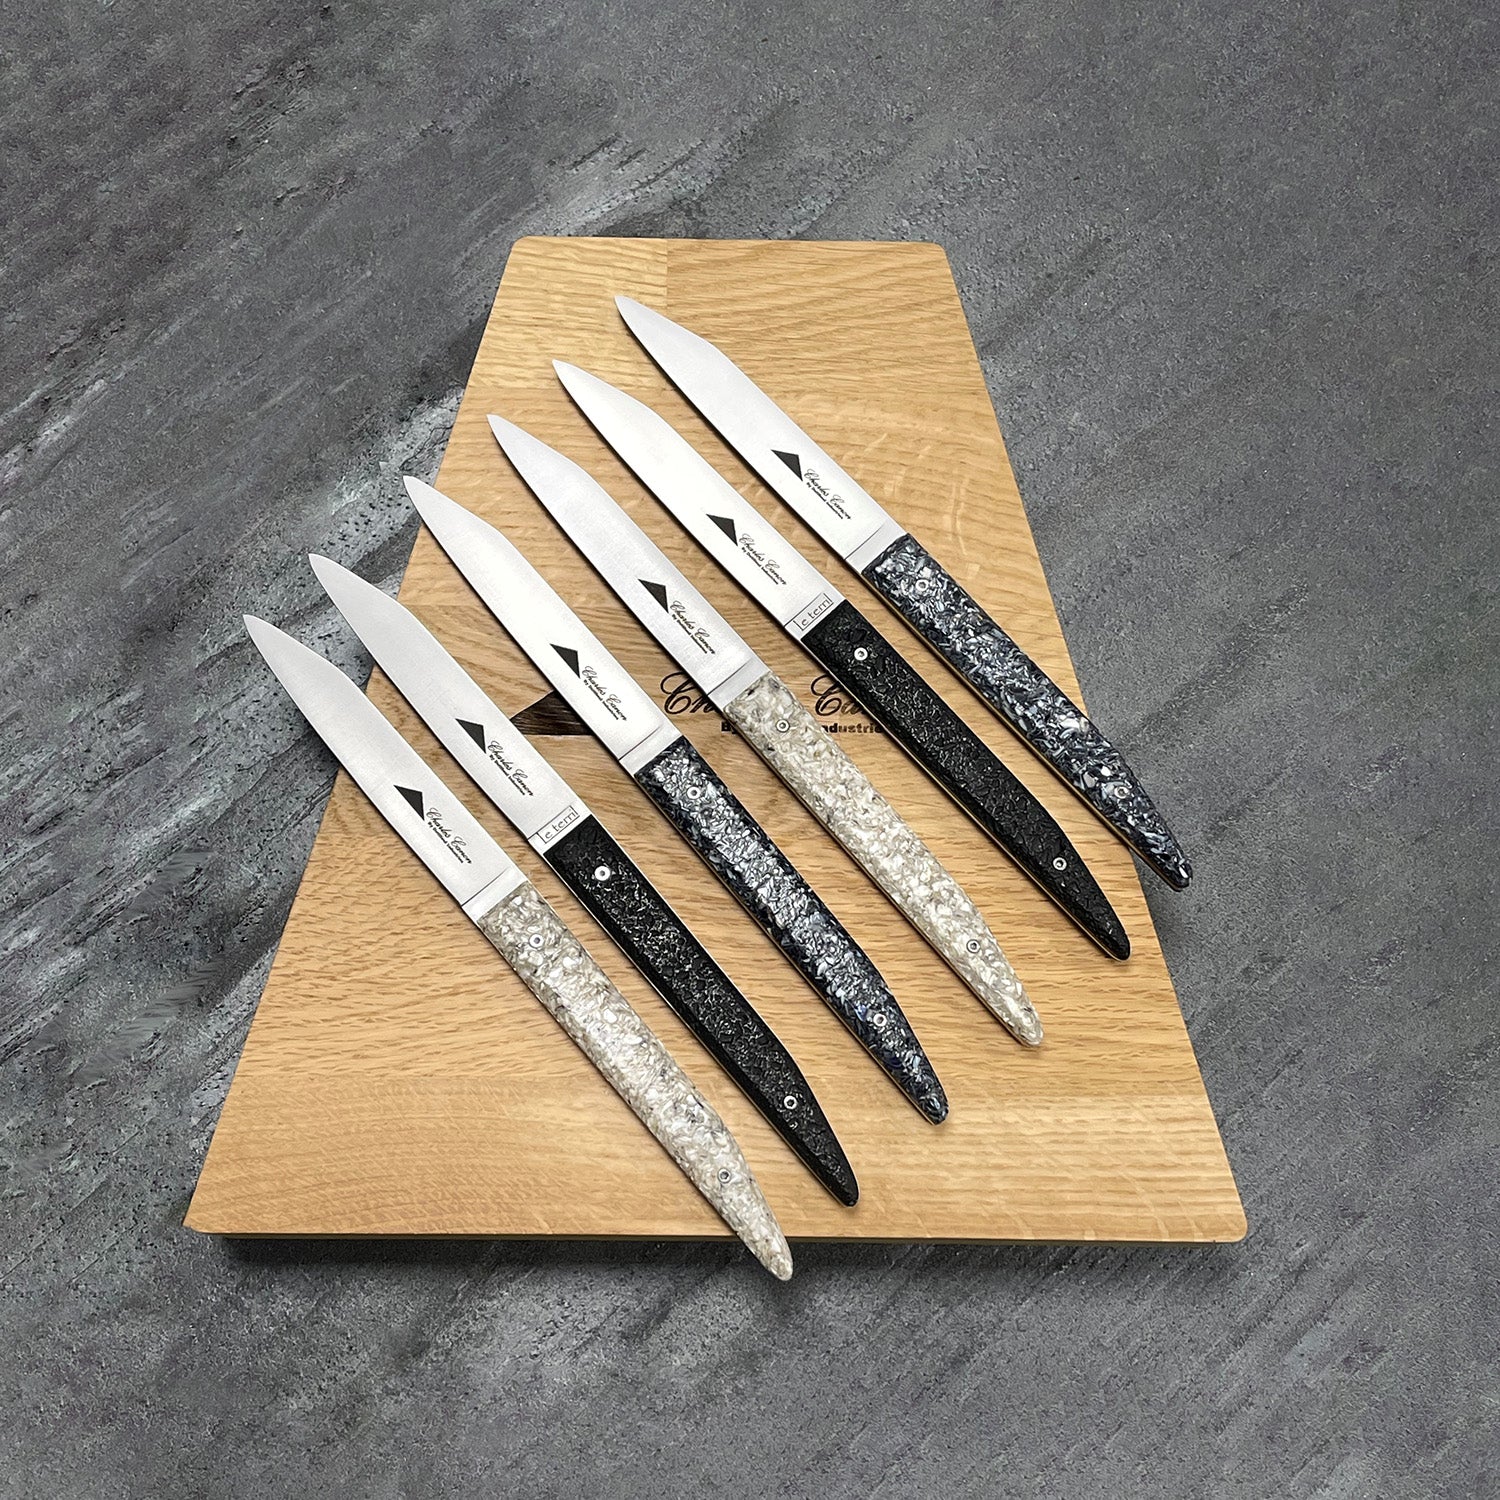 6 table knives with a finishing mix